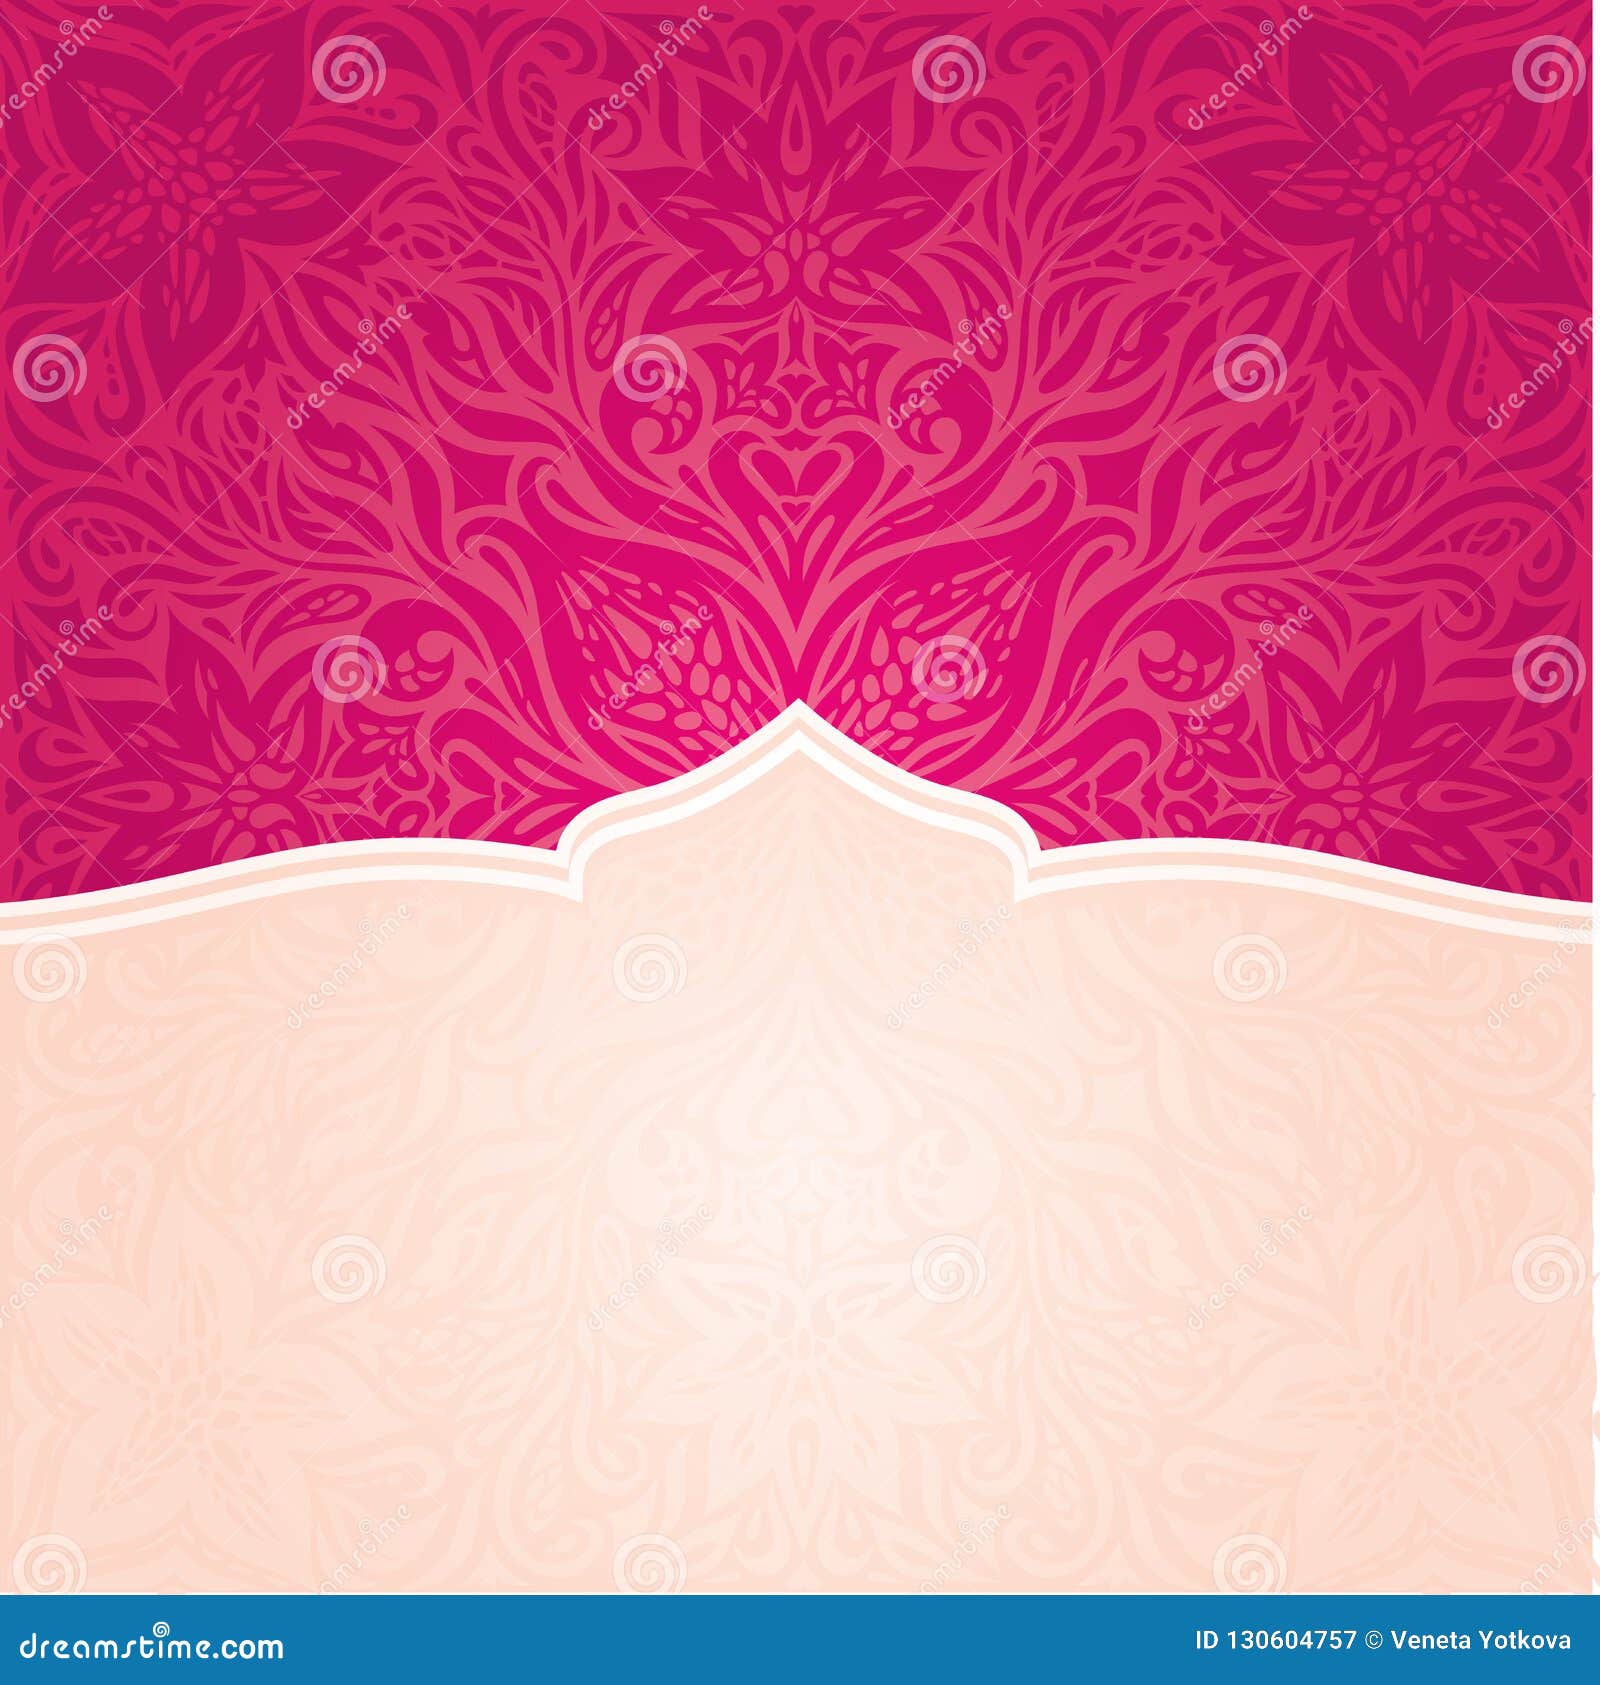 Red Floral Vector Pattern Wallpaper Mandala Background Trendy Fashion Mandala Design With Copy Space Stock Vector Illustration Of Pattern Holiday 130604757